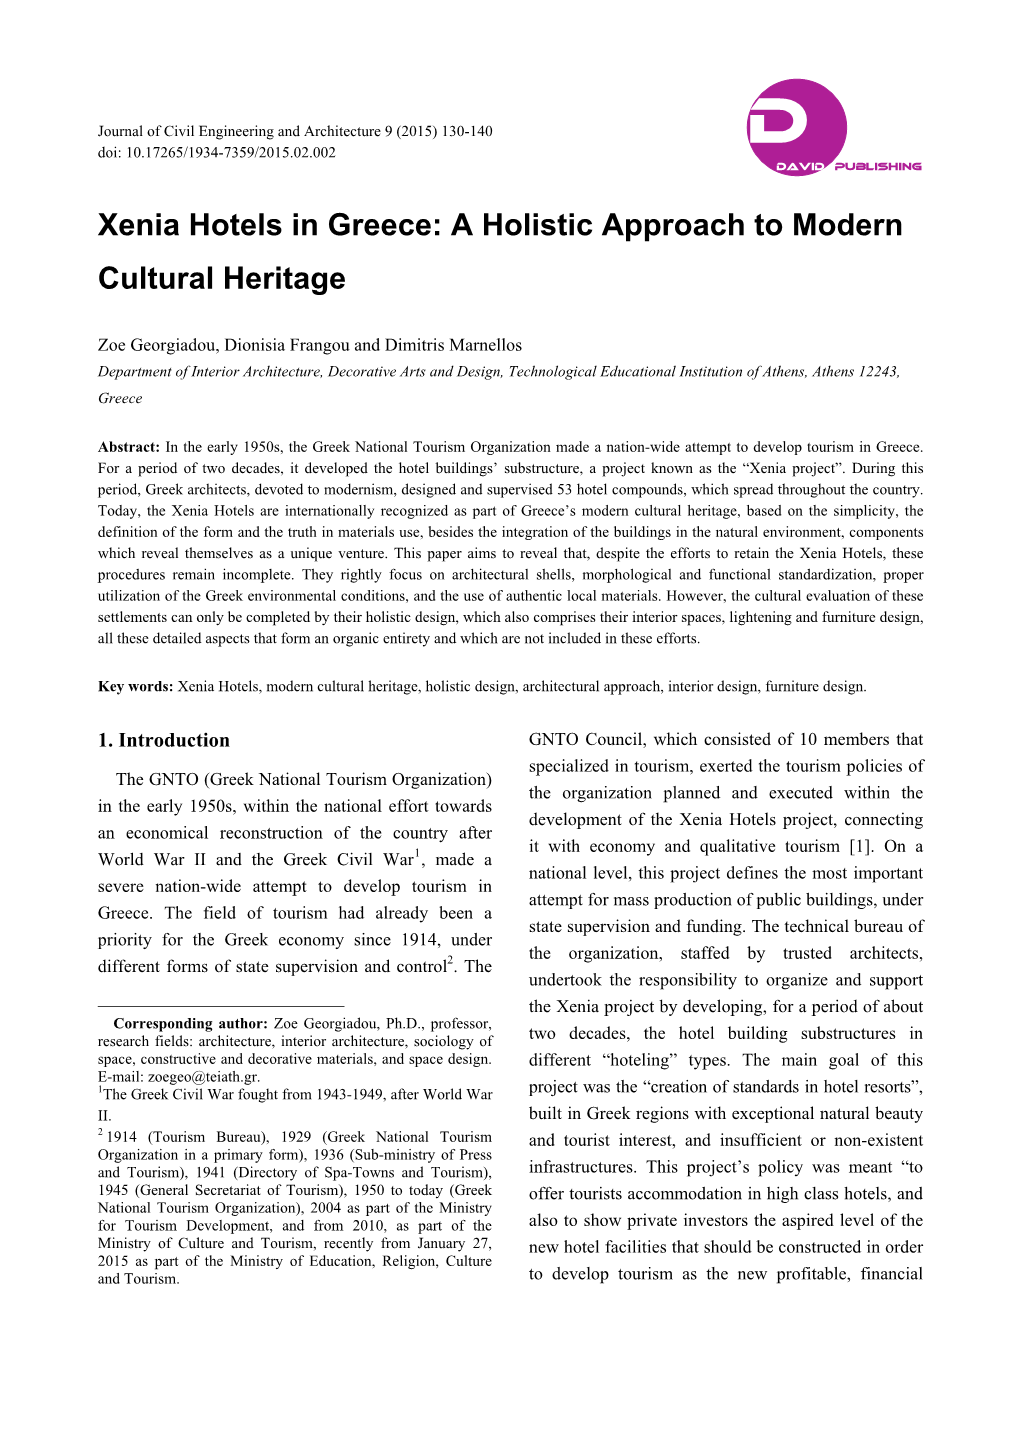 A Holistic Approach to Modern Cultural Heritage